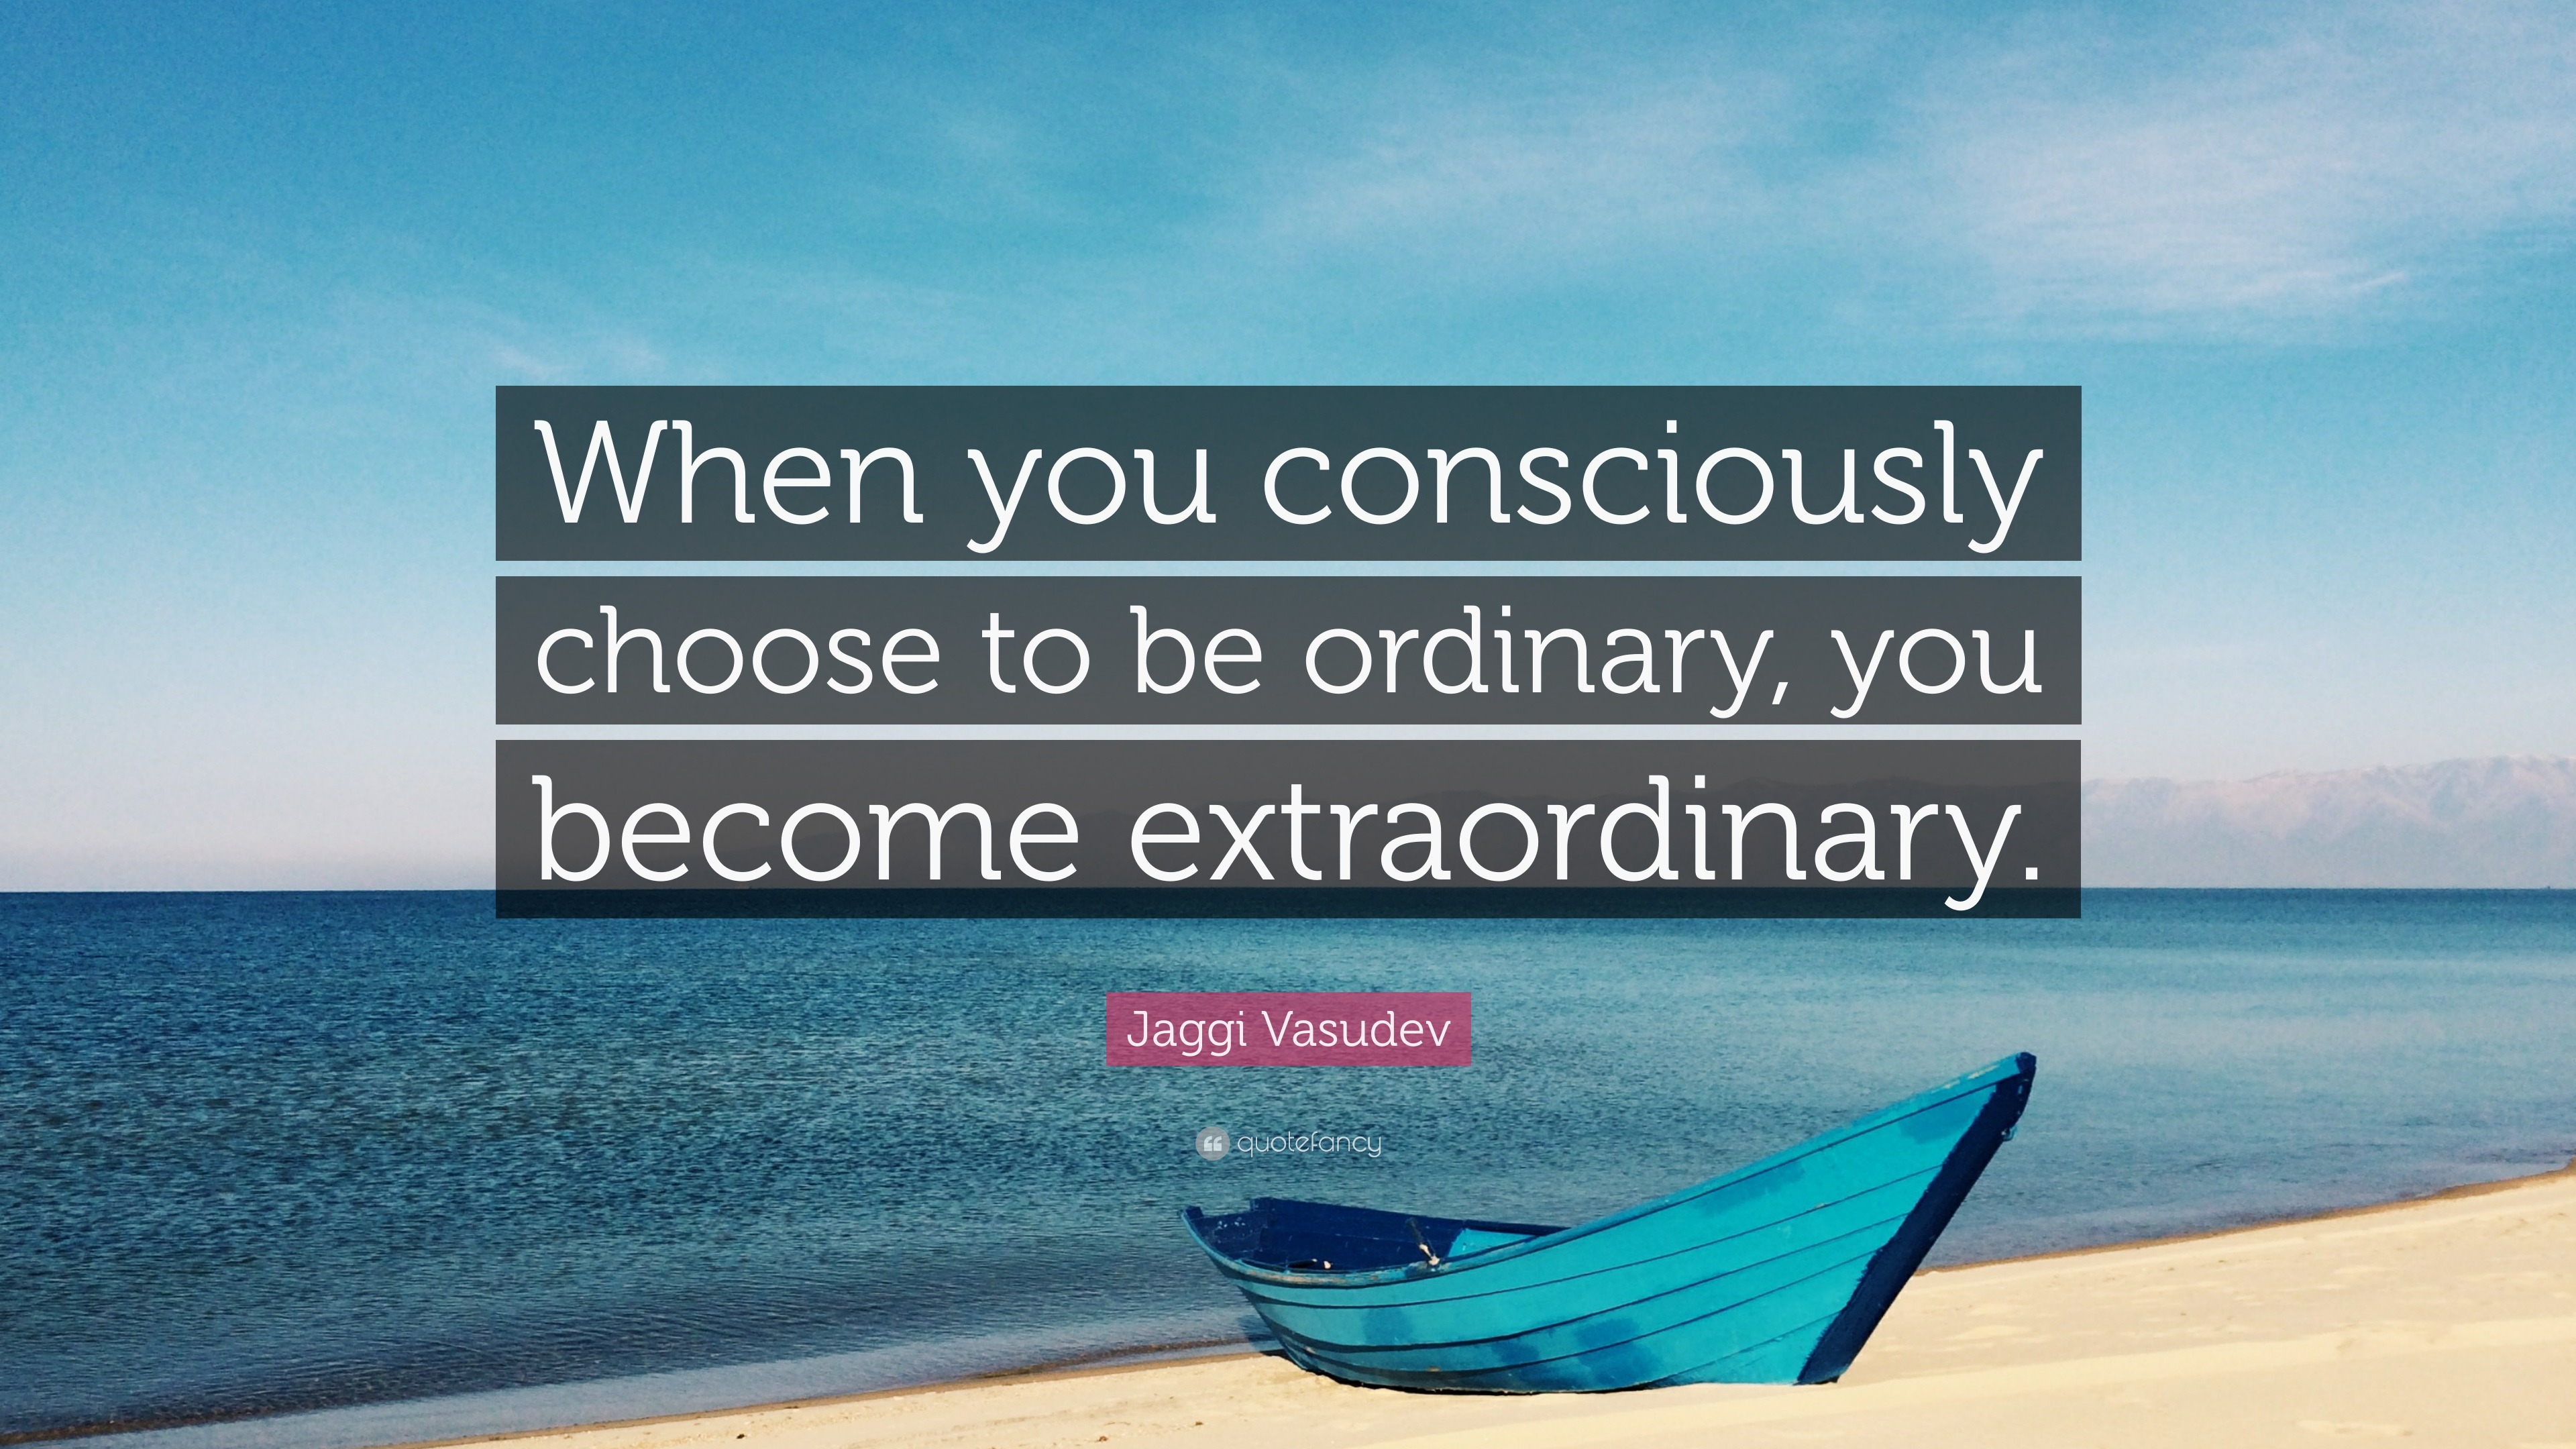 Jaggi Vasudev Quote: “When you consciously choose to be ordinary, you ...